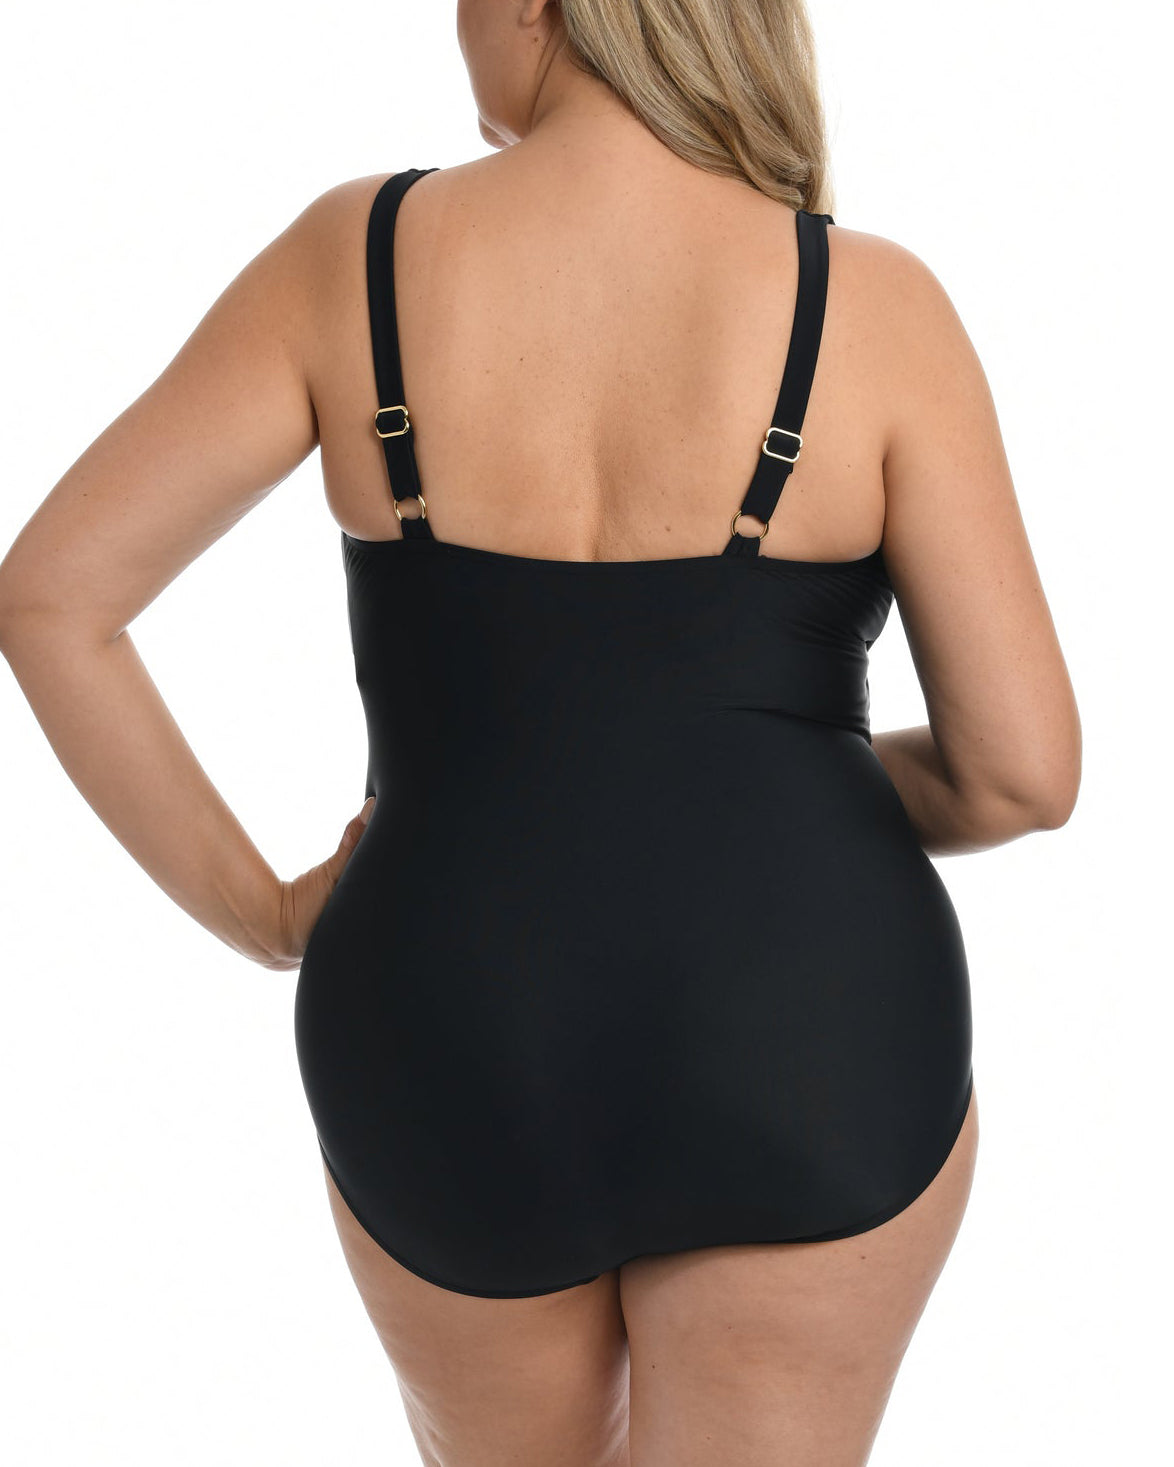 Model wearing a one piece swimsuit with a twist detail in black